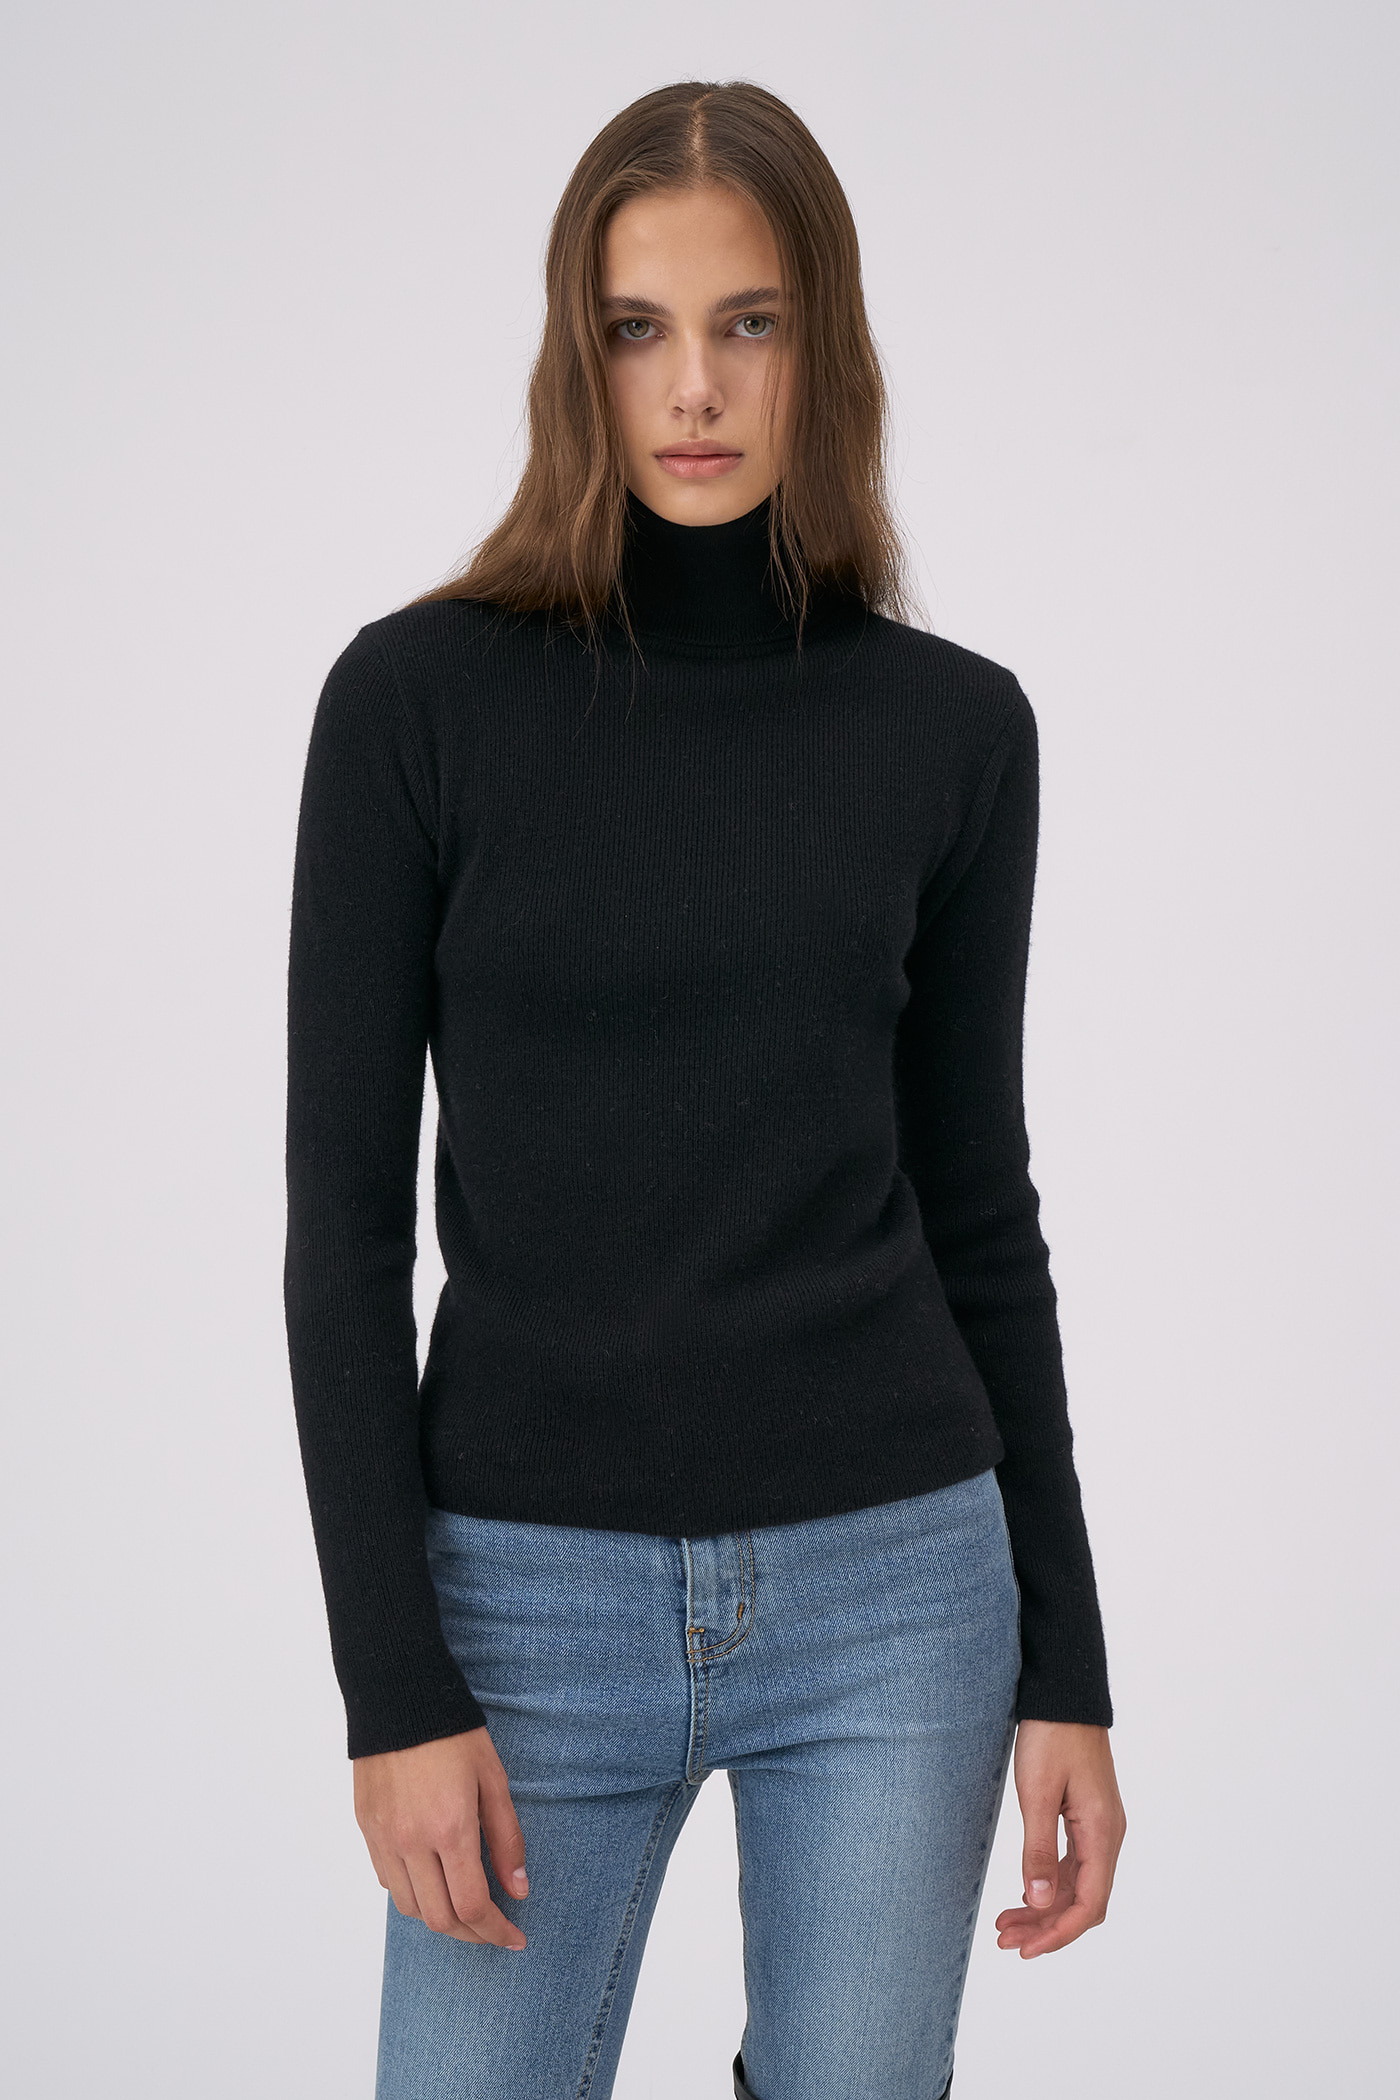 Merino Wool 100Ribbed High Neck Knit[LMBBWIKN156]-2color